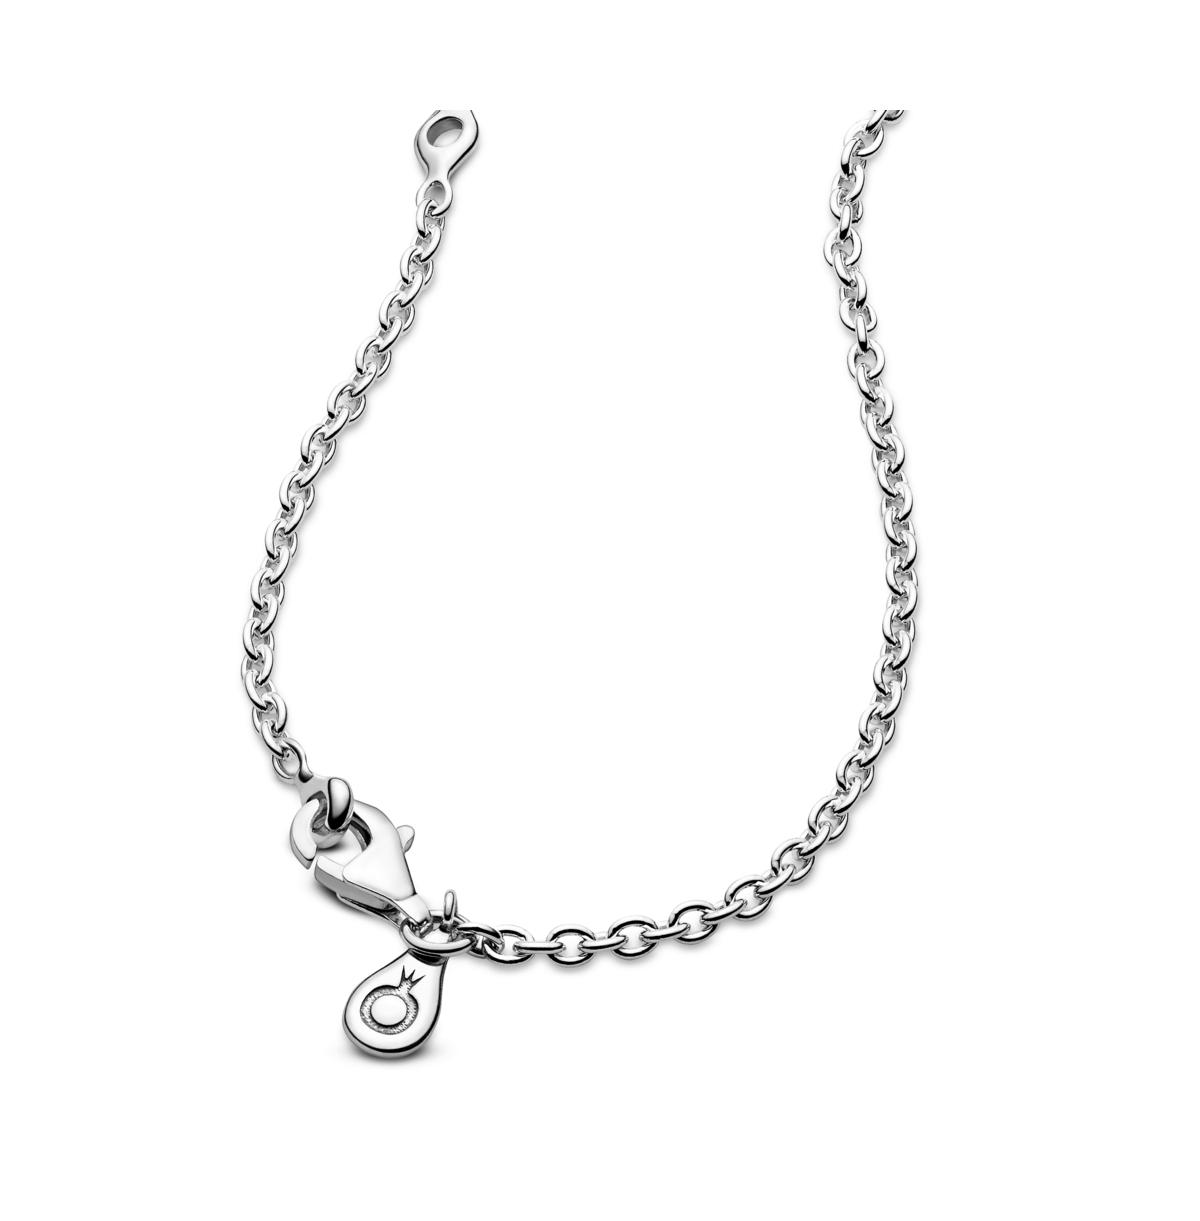 NEW Authentic PANDORA Brand #590200-45 925 Sterling Silver Cable Chain  Necklace | Elisa Fedrizzi